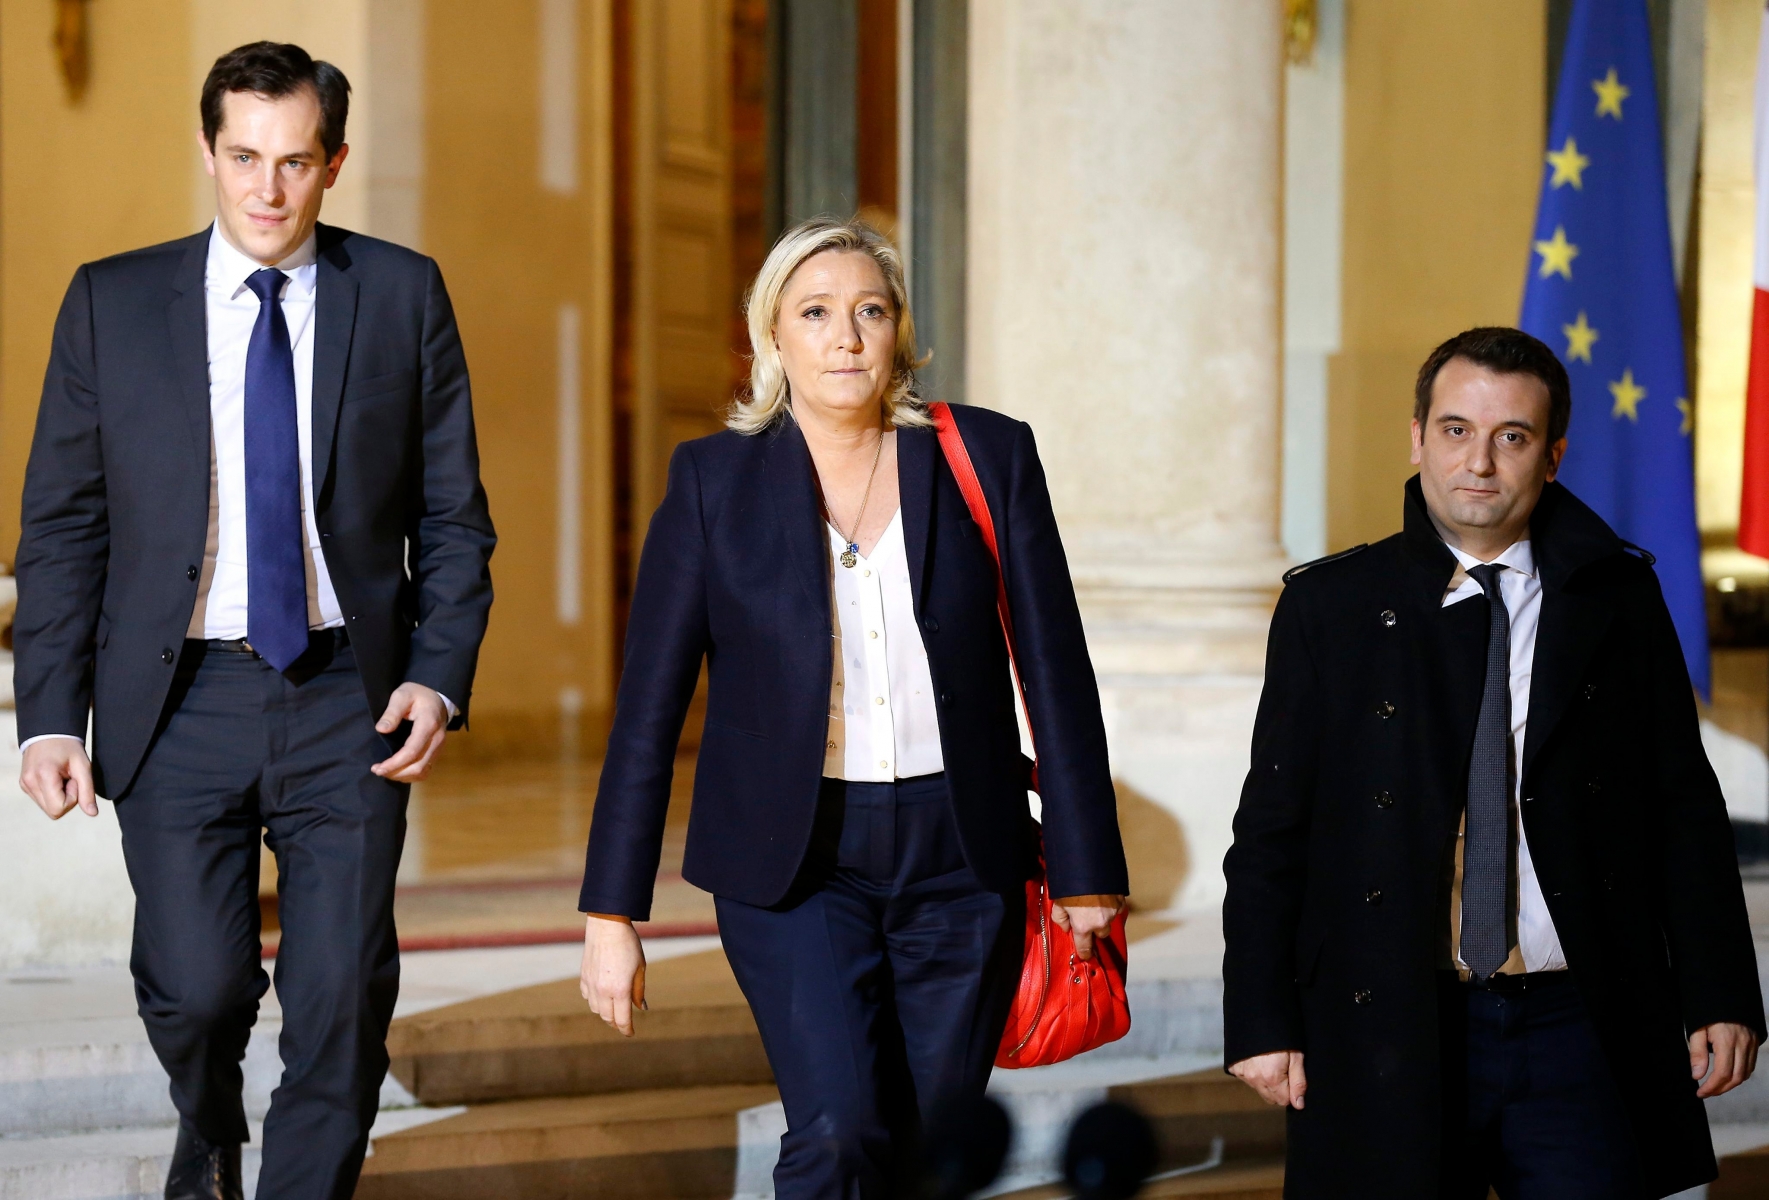 epa05027056 Leader of the French far-right party Front National (FN) Marine Le Pen (C), vice president Florian Philippot (R) and General Secretary Nicolas Bay (L), leave after a meeting with French President Francois Hollande (not pictured) at the Elysee Palace in Paris, France, 15 November 2015. At least 129 people were killed in a series of attacks in Paris on 13 November, according to French officials. Eight assailants were killed, seven when they detonated their explosive belts, and one when he was shot by officers, police said. French President Francois Hollande says that the attacks in Paris were an 'act of war' carried out by the Islamic State extremist group.  EPA/GUILLAUME HORCAJUELO FRANKREICH TERRORISMUS ANSCHLAEGE PARIS